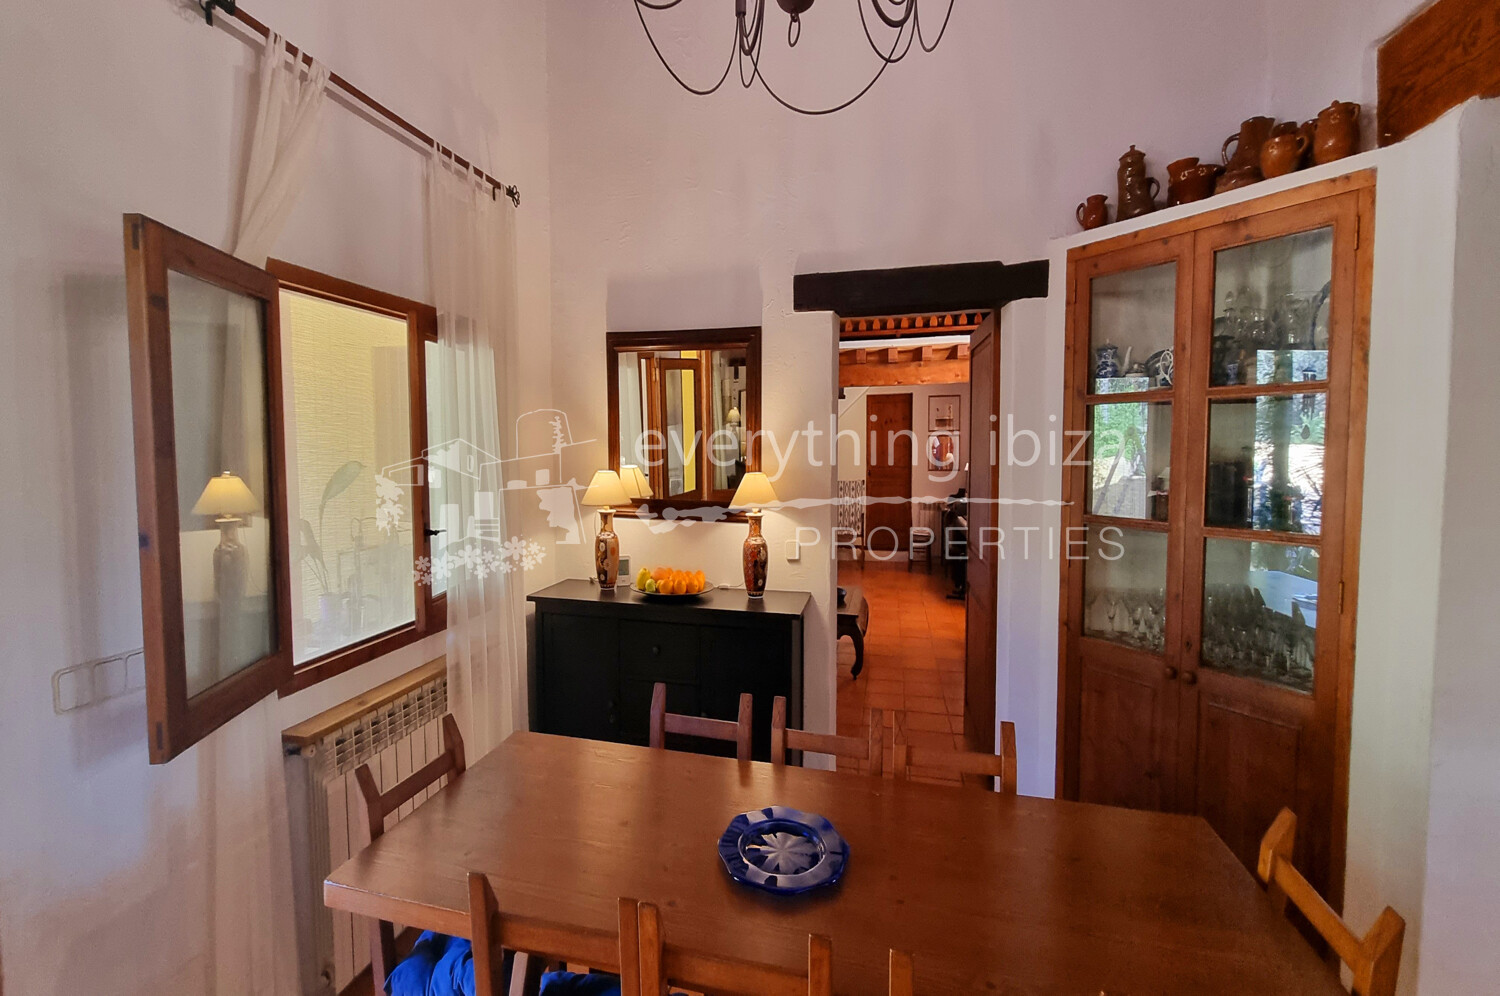 Beautiful Traditional Country Finca with Full Tourist License, ref. 1536, for sale in Ibiza by everything ibiza Properties